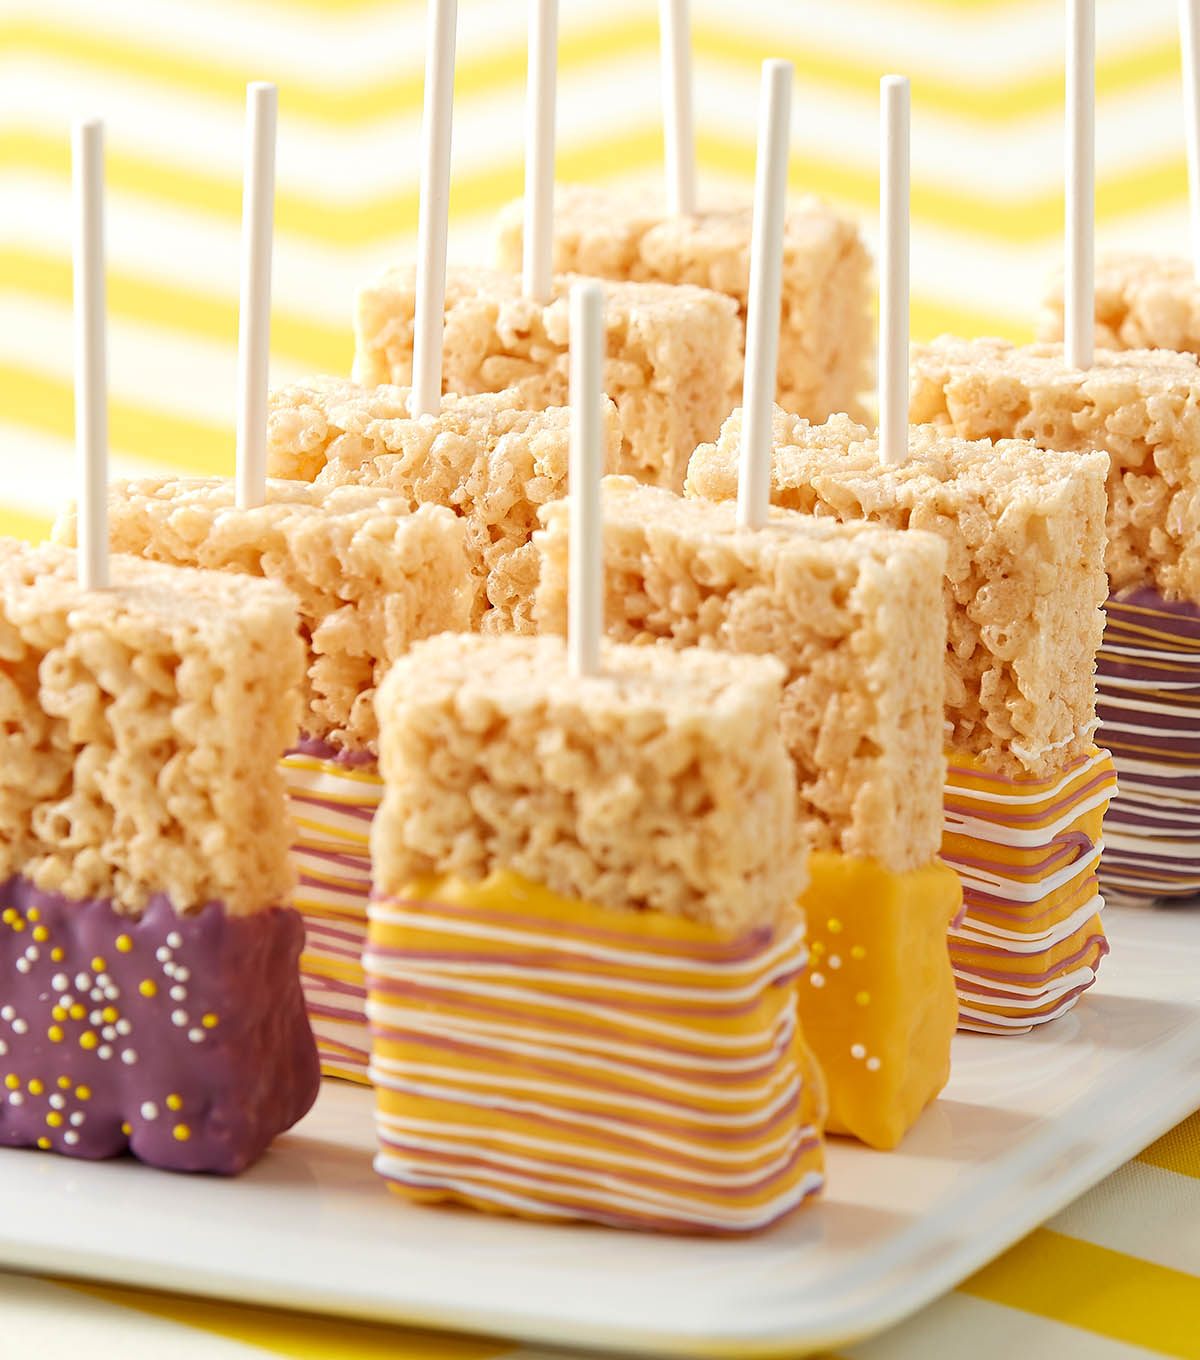 How To Make Hip to be Square Rice Cereal Treat Pops | JOANN